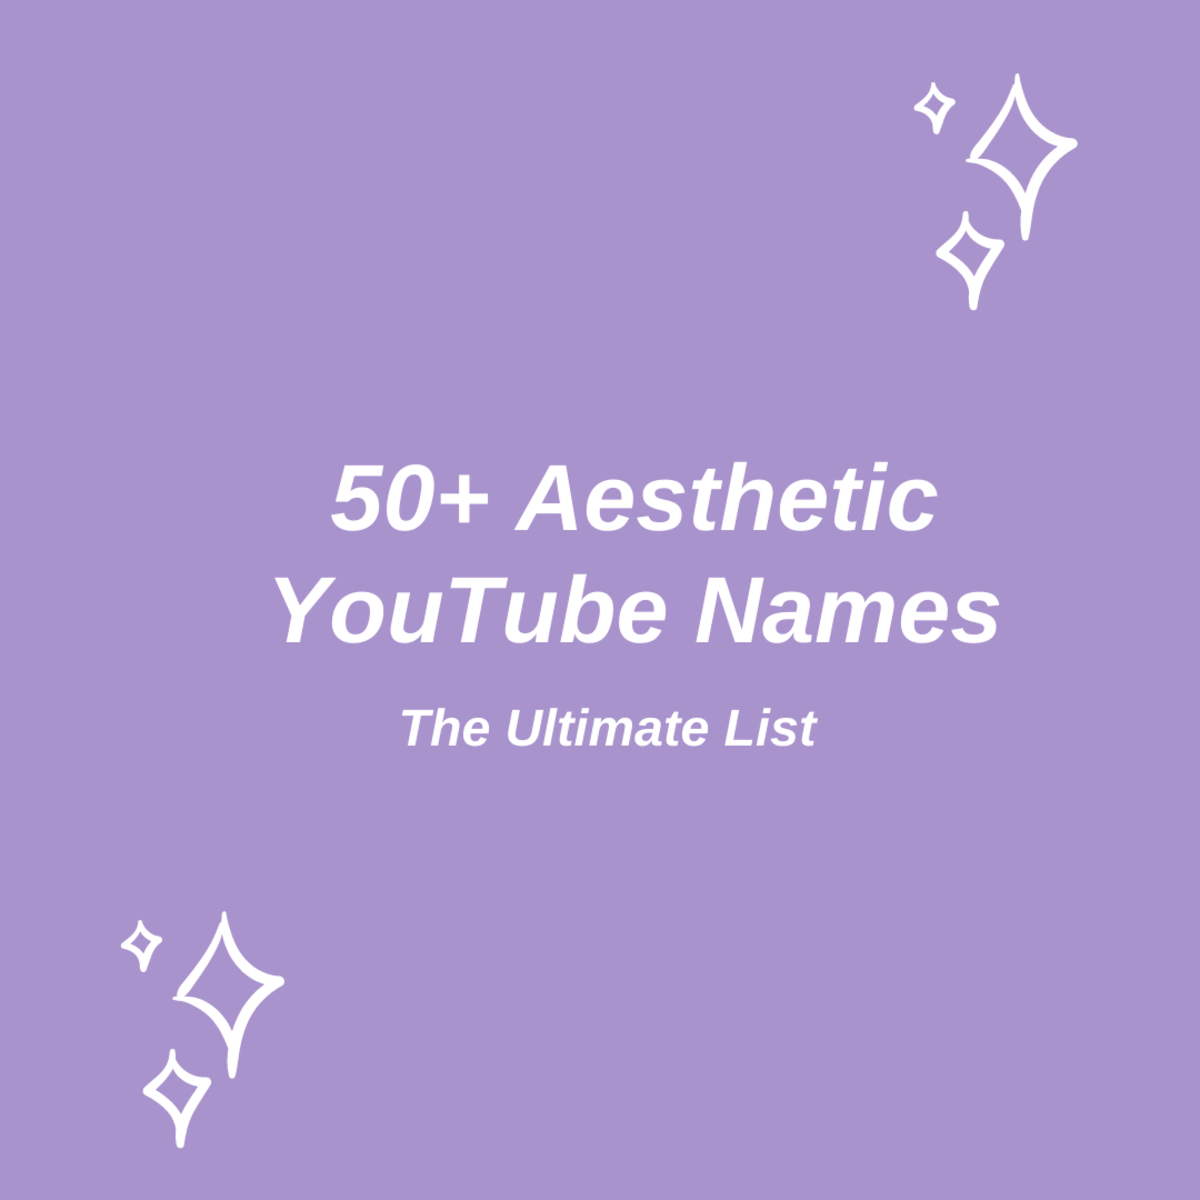 Discover over 50 aesthetic YouTube names in this ultimate list!